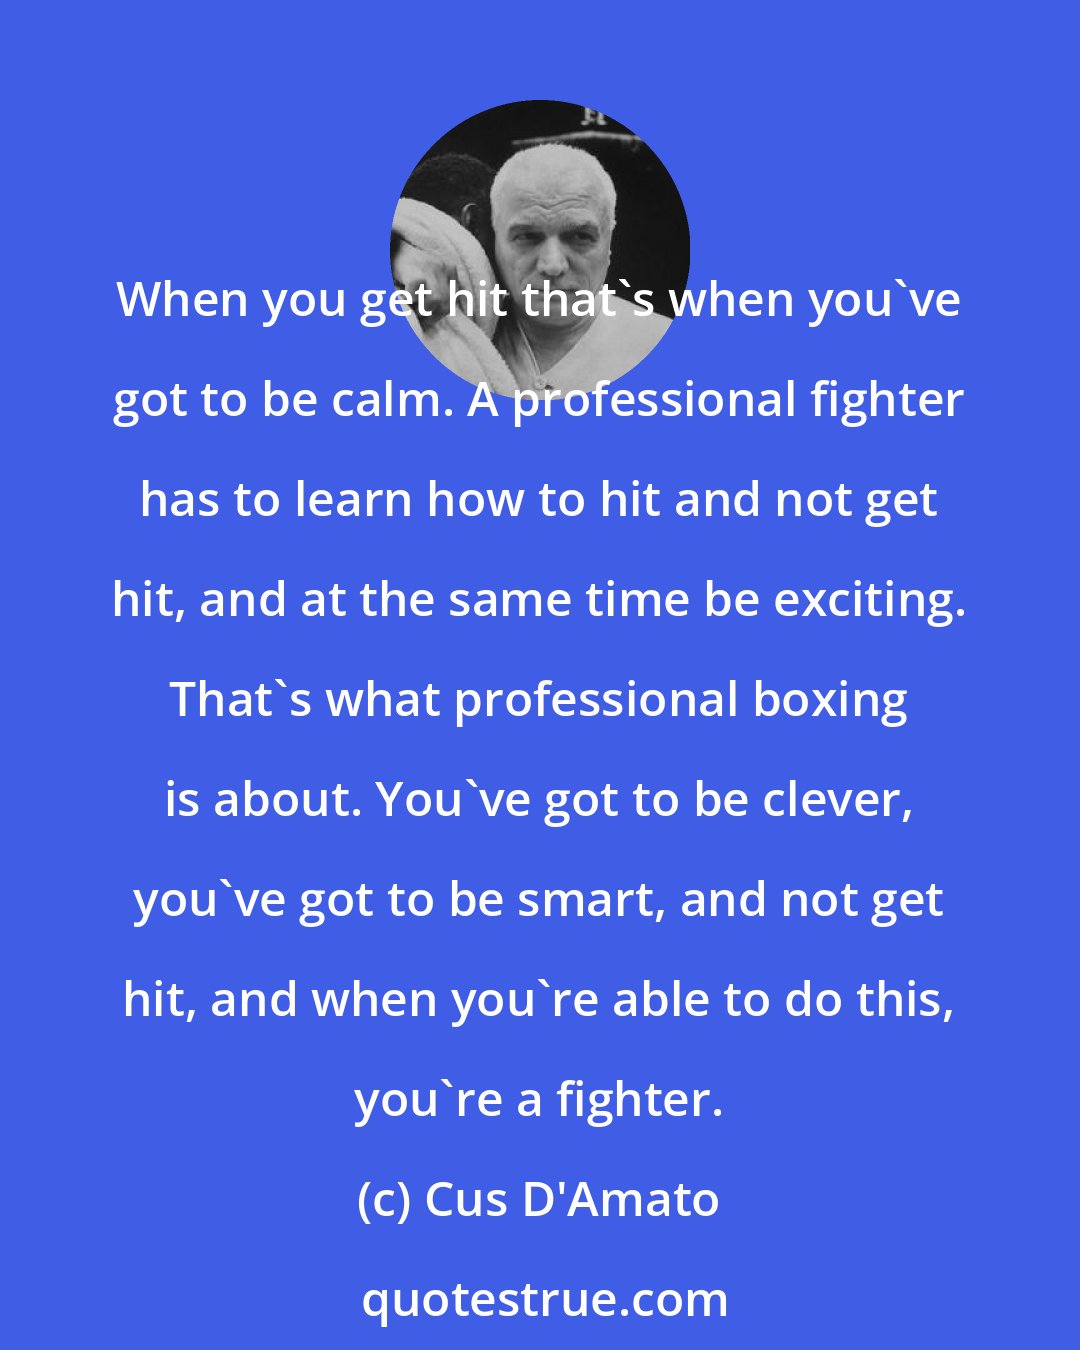 Cus D'Amato: When you get hit that's when you've got to be calm. A professional fighter has to learn how to hit and not get hit, and at the same time be exciting. That's what professional boxing is about. You've got to be clever, you've got to be smart, and not get hit, and when you're able to do this, you're a fighter.